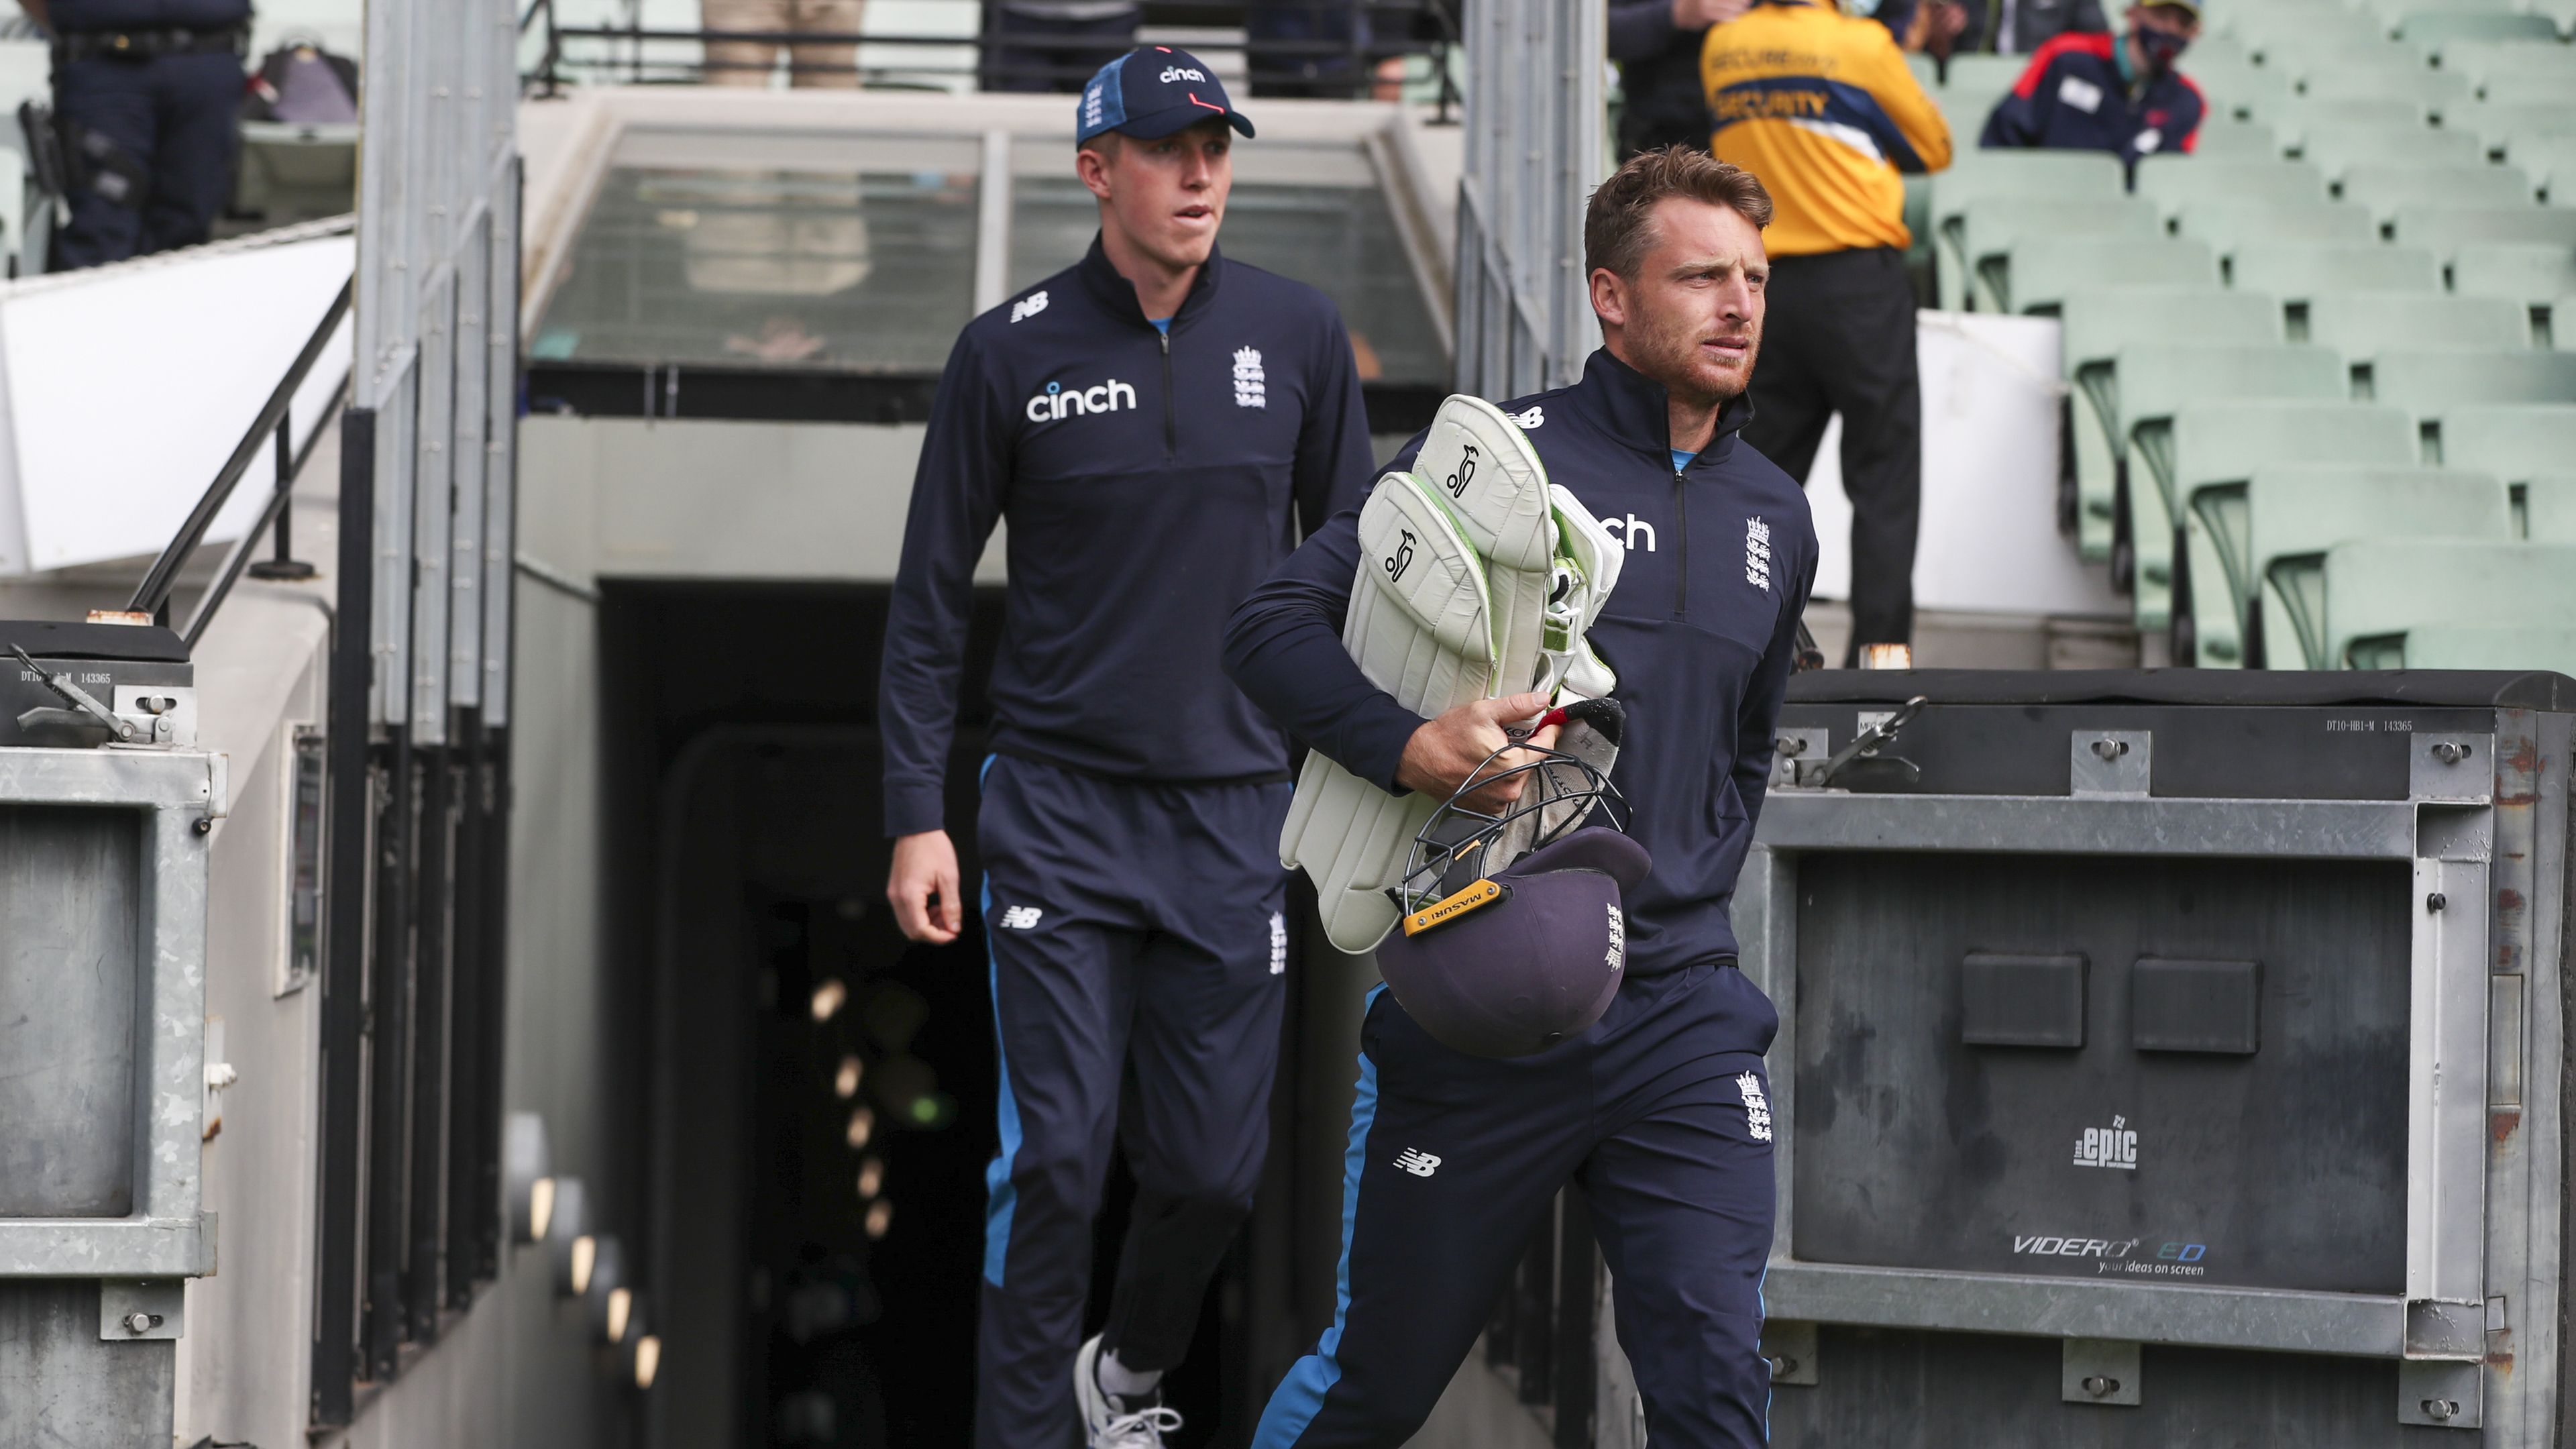 England arrives at the MCG and prepares for a full day of play after COVID scare